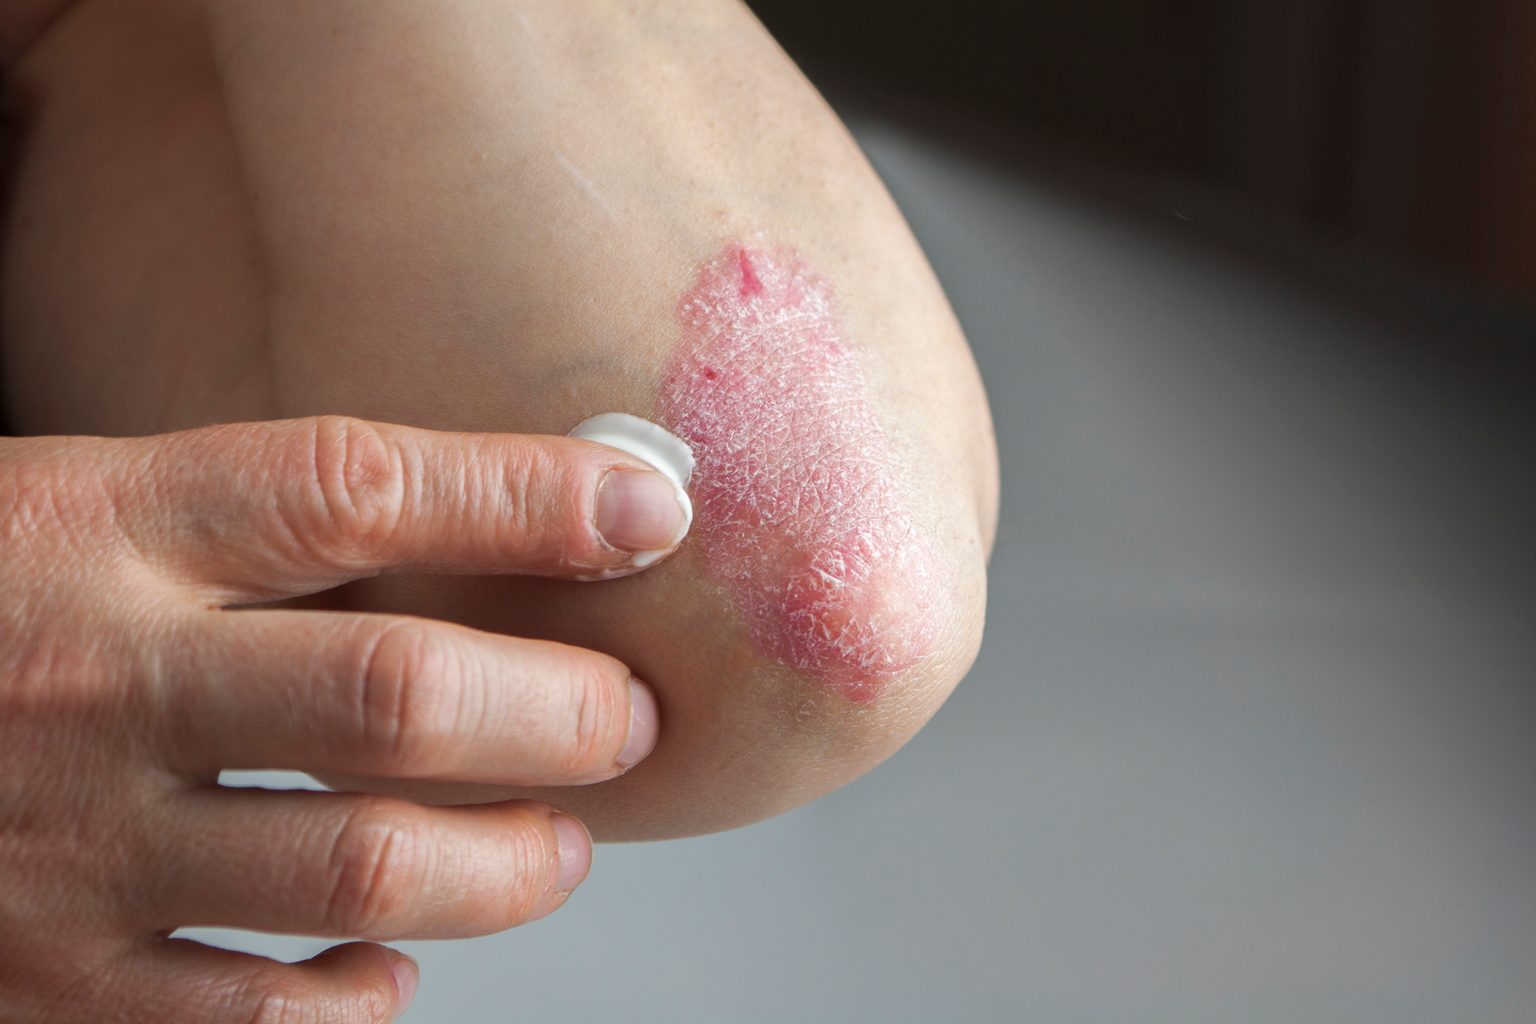 Psoriasis: A Guide to Symptoms, Causes, Types, Treatments